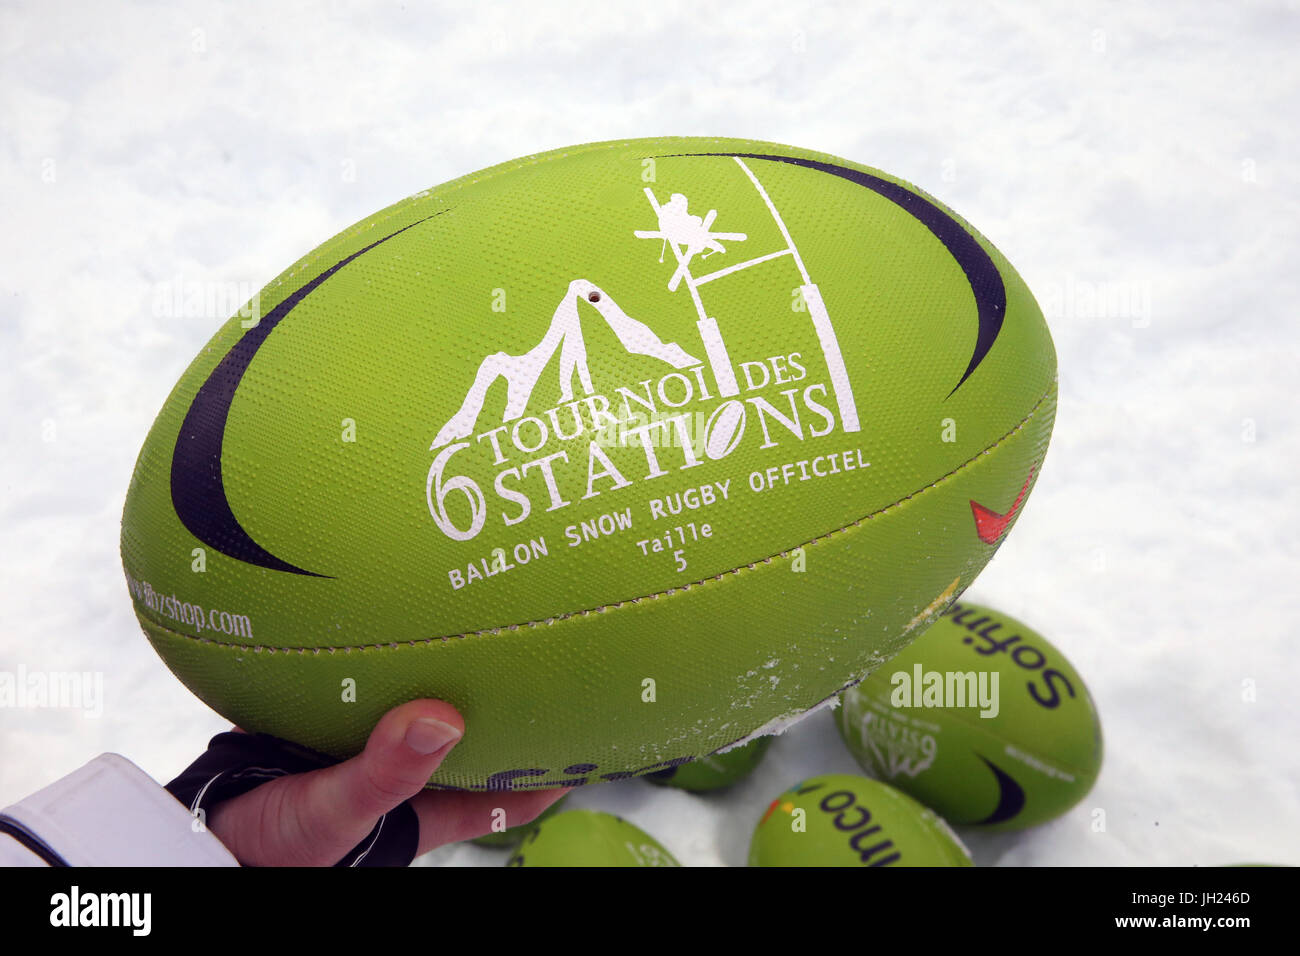 Rugby six nations championship on snow.  France. Stock Photo